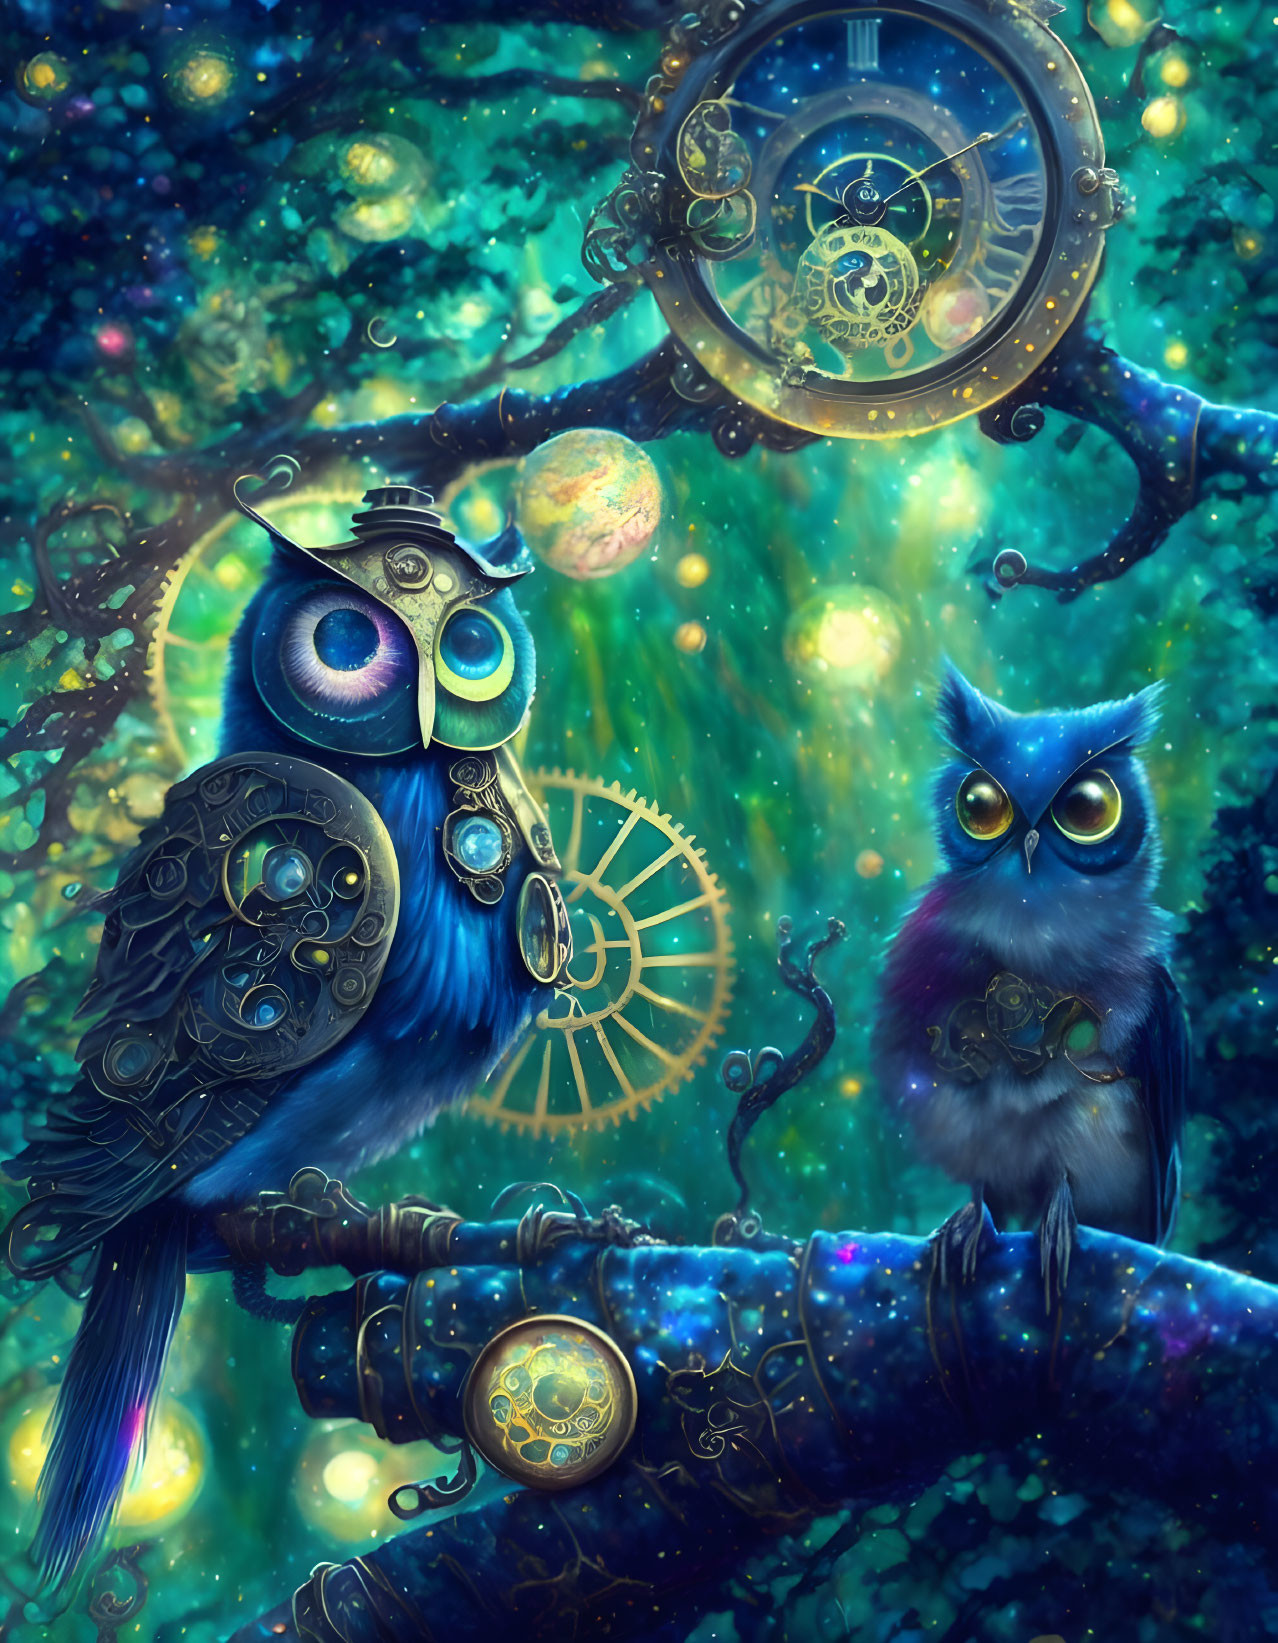 Steampunk-style mechanical owl next to a natural owl on tree in mystical starry background.